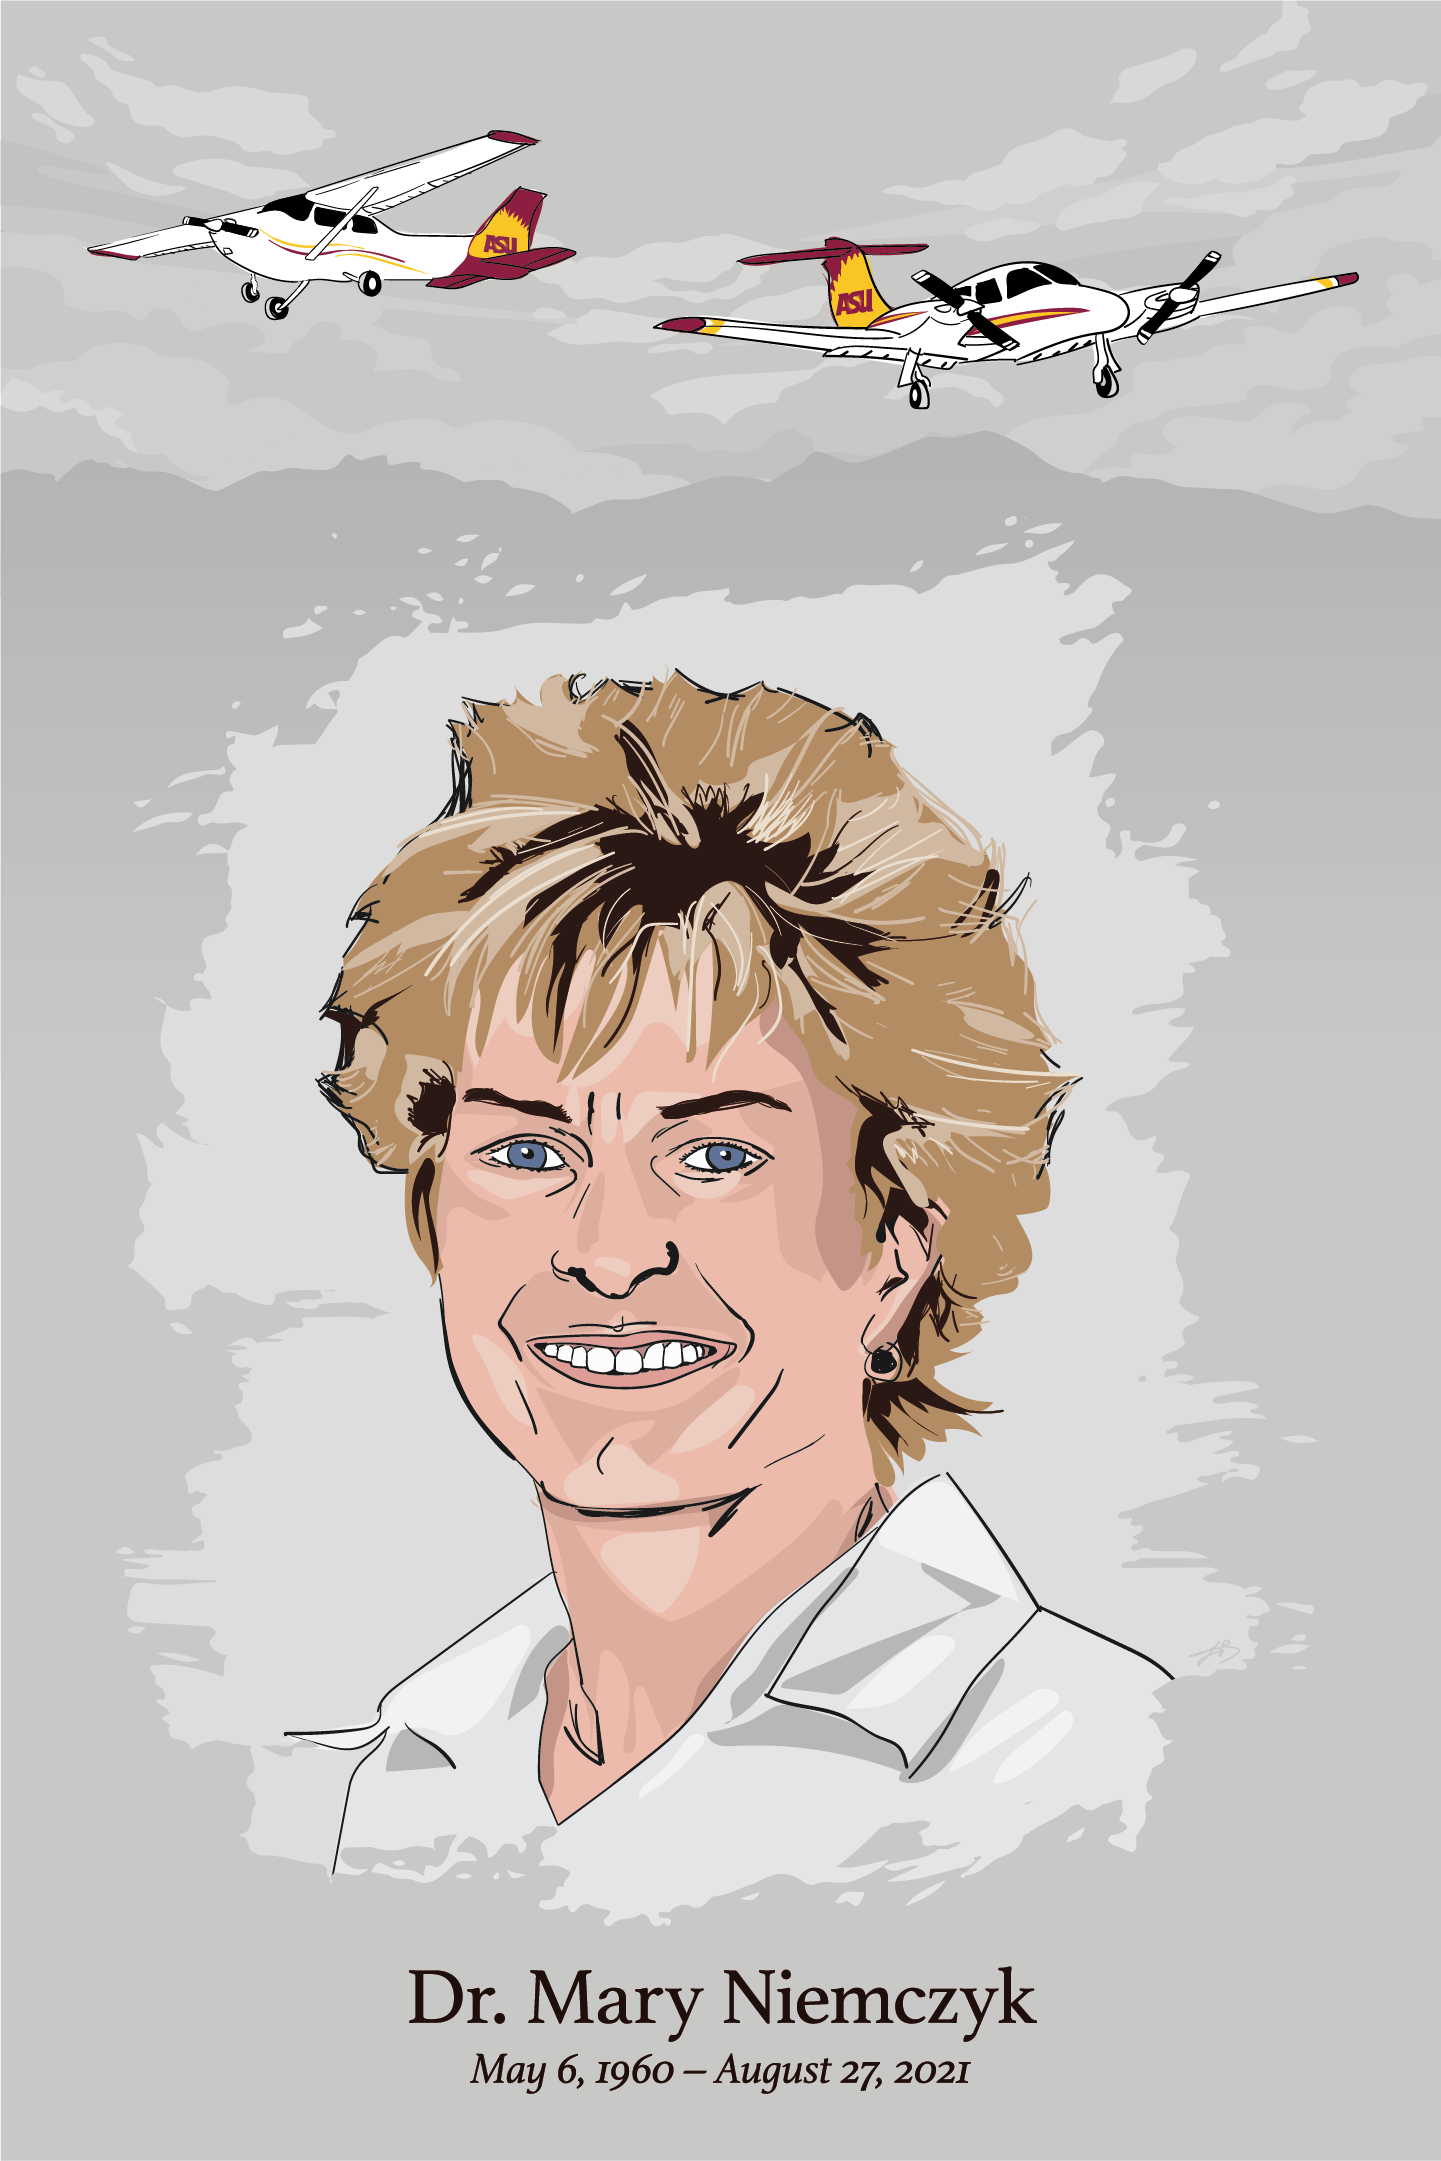 Artwork featuring Dr. Mary Niemczyk